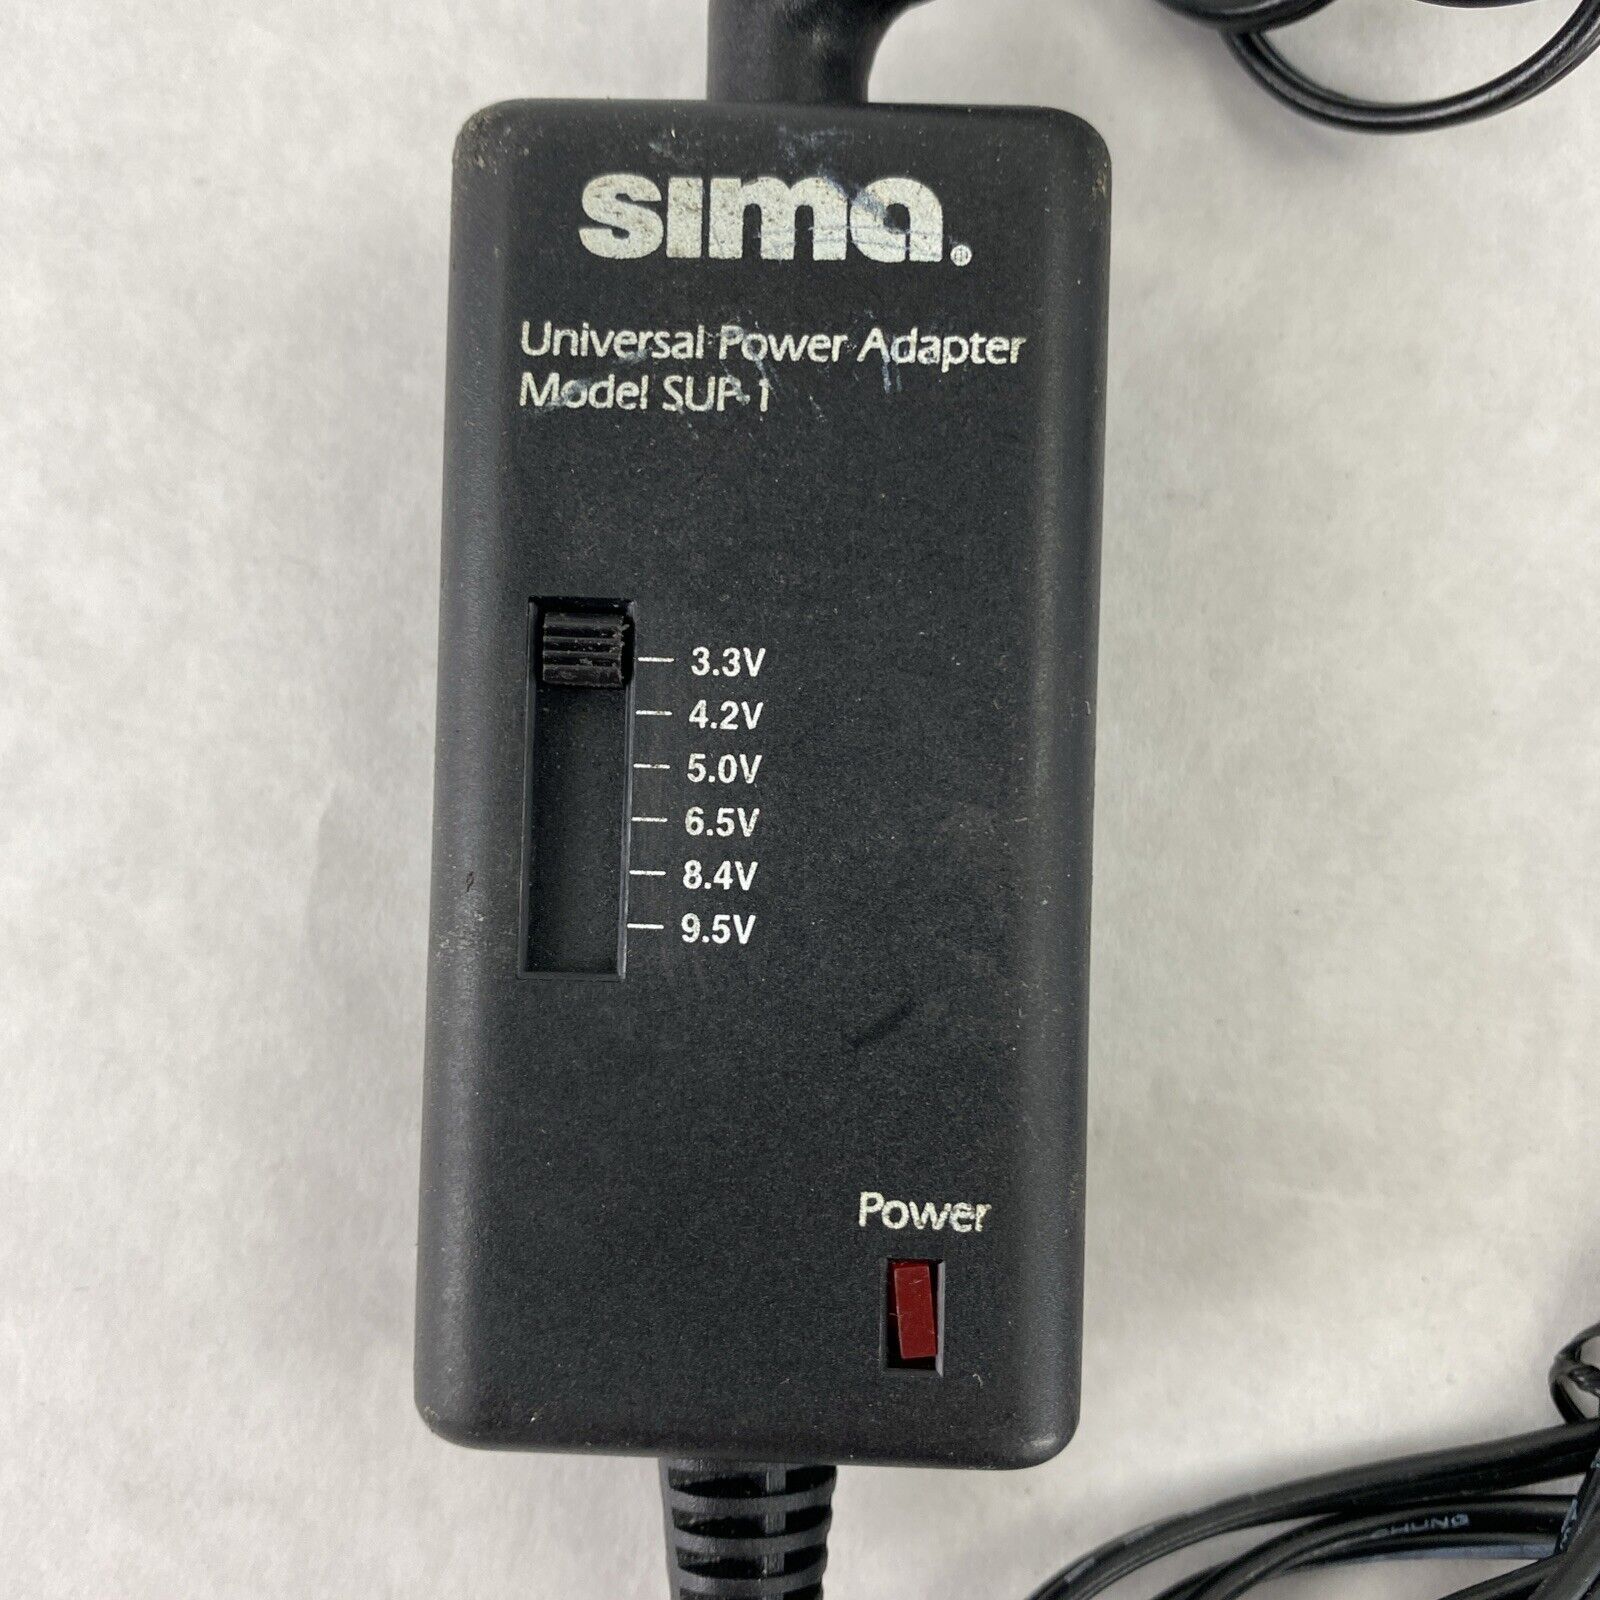 Sima SUP-1 Universal Power Adapter 3.3V to 9.5V with Sony Handycam Adapter